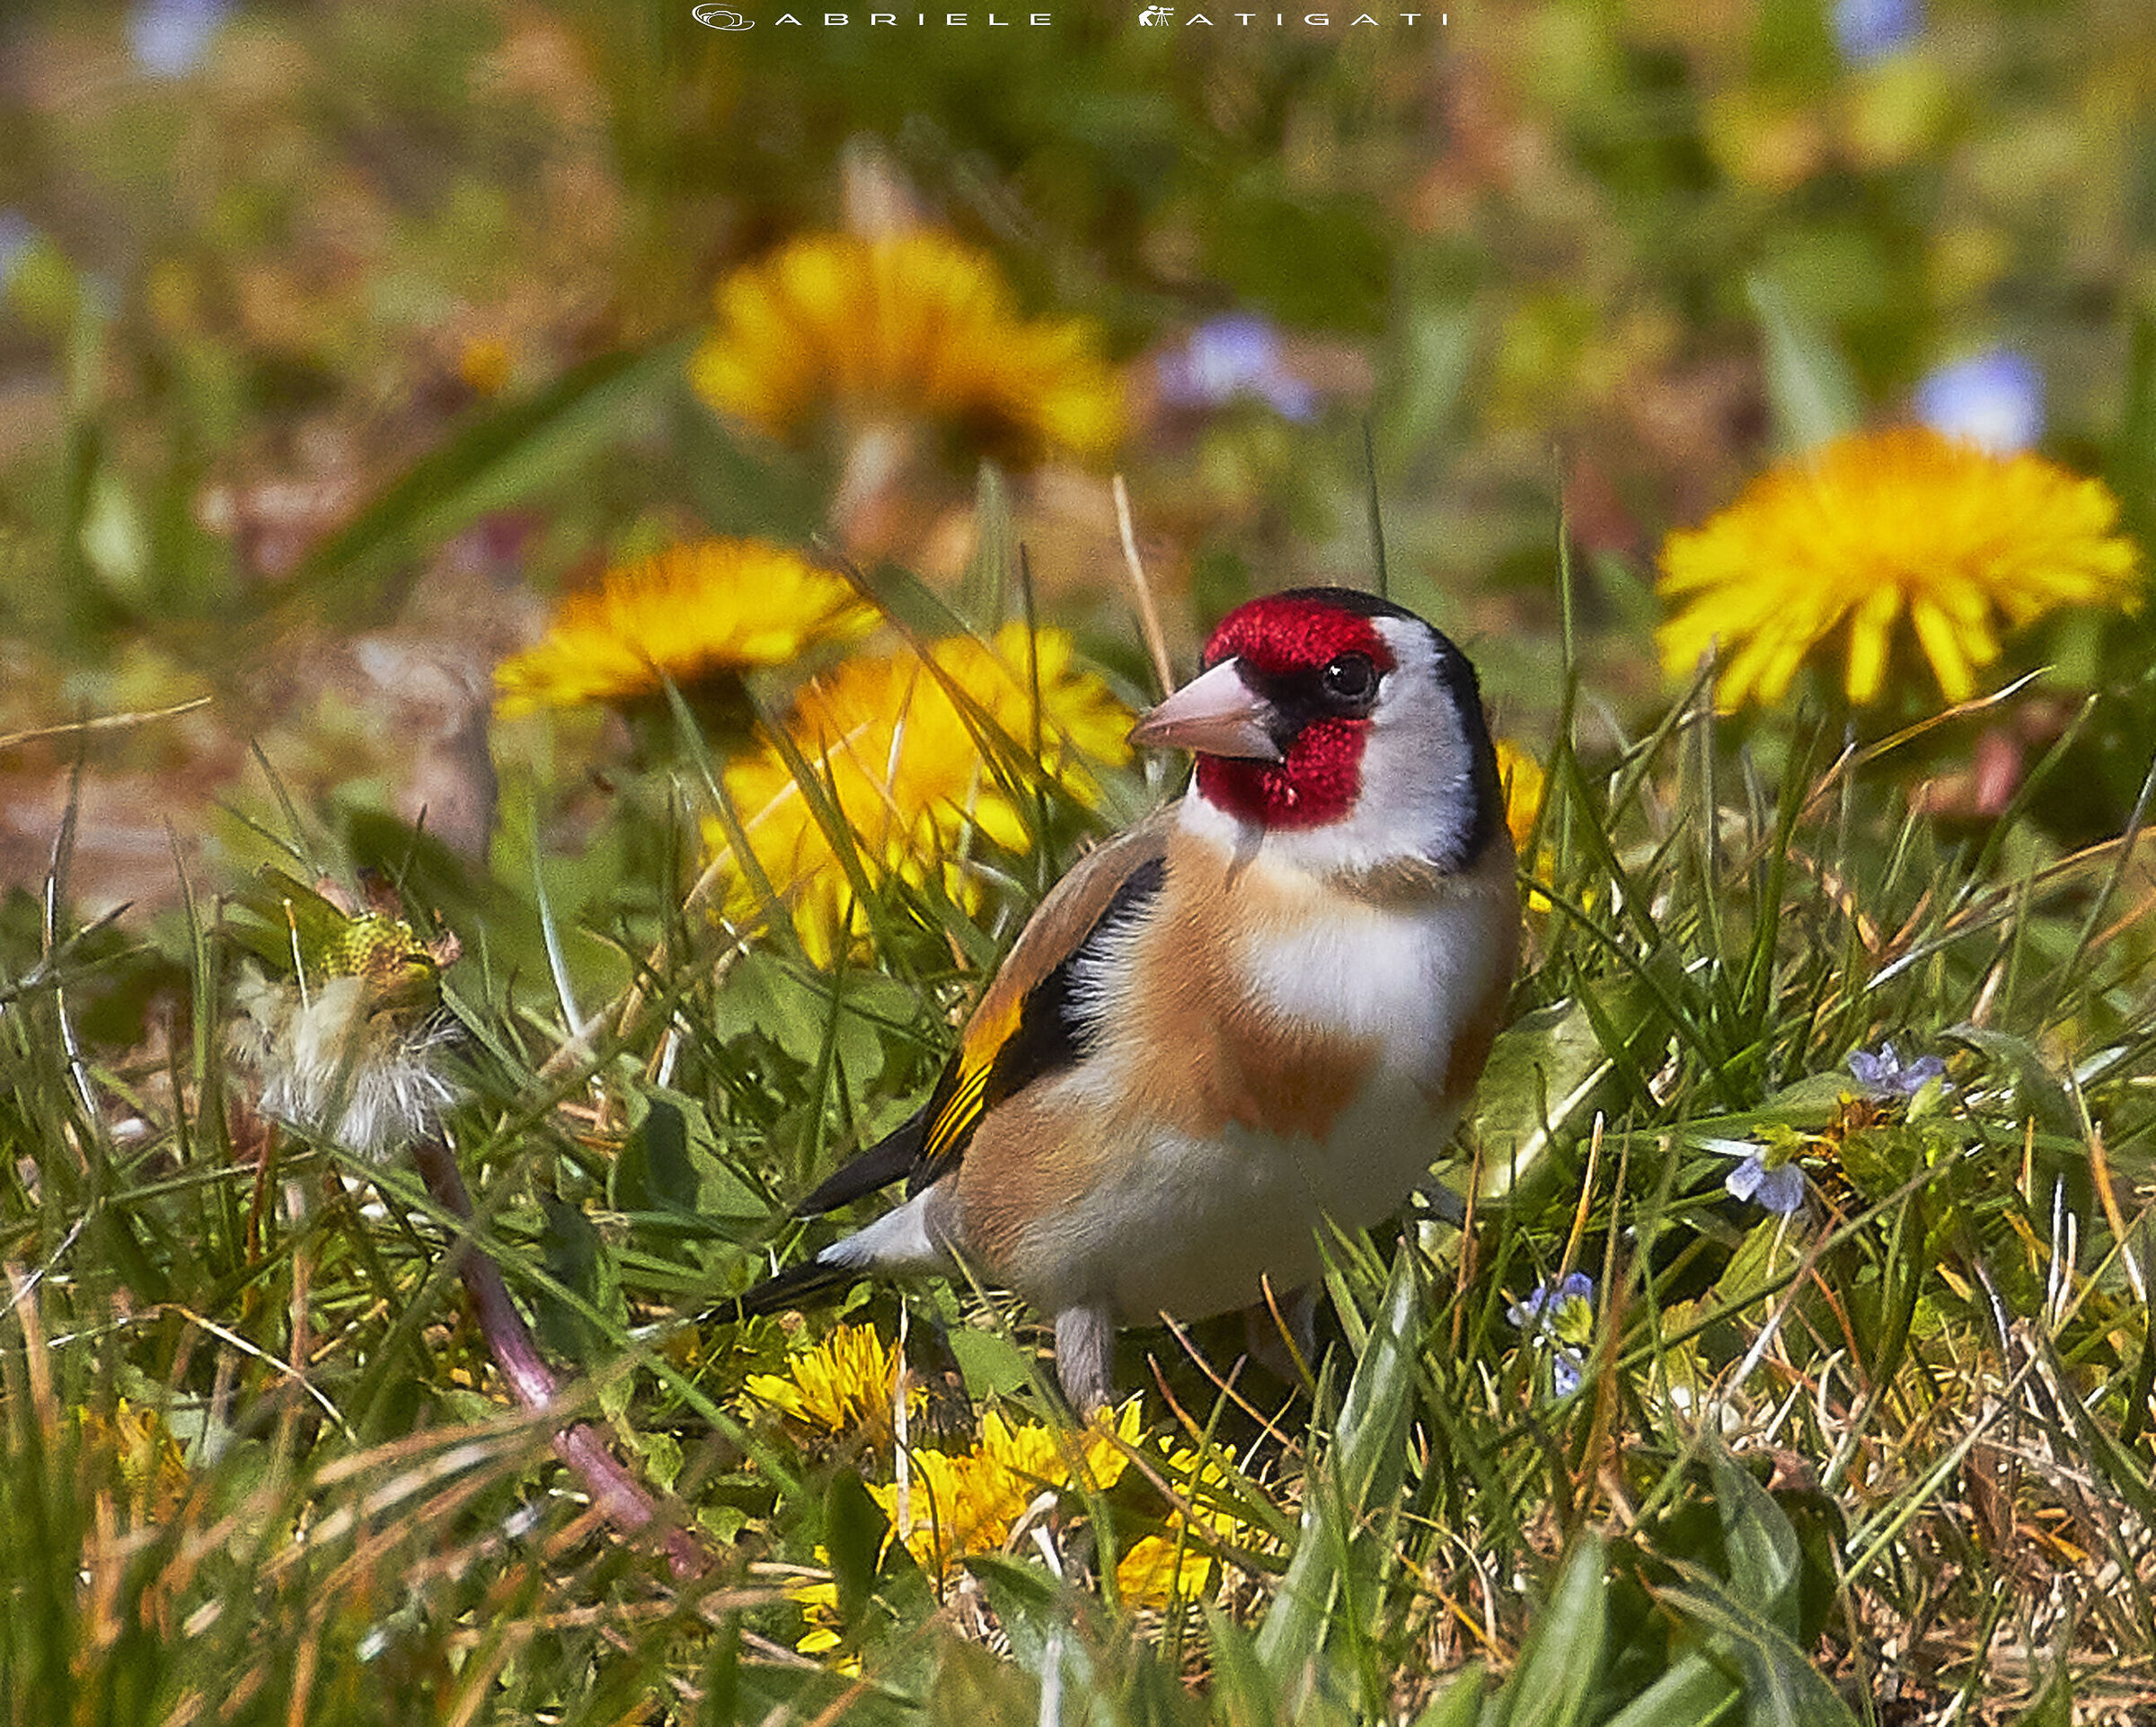 Goldfinch among the flowers...